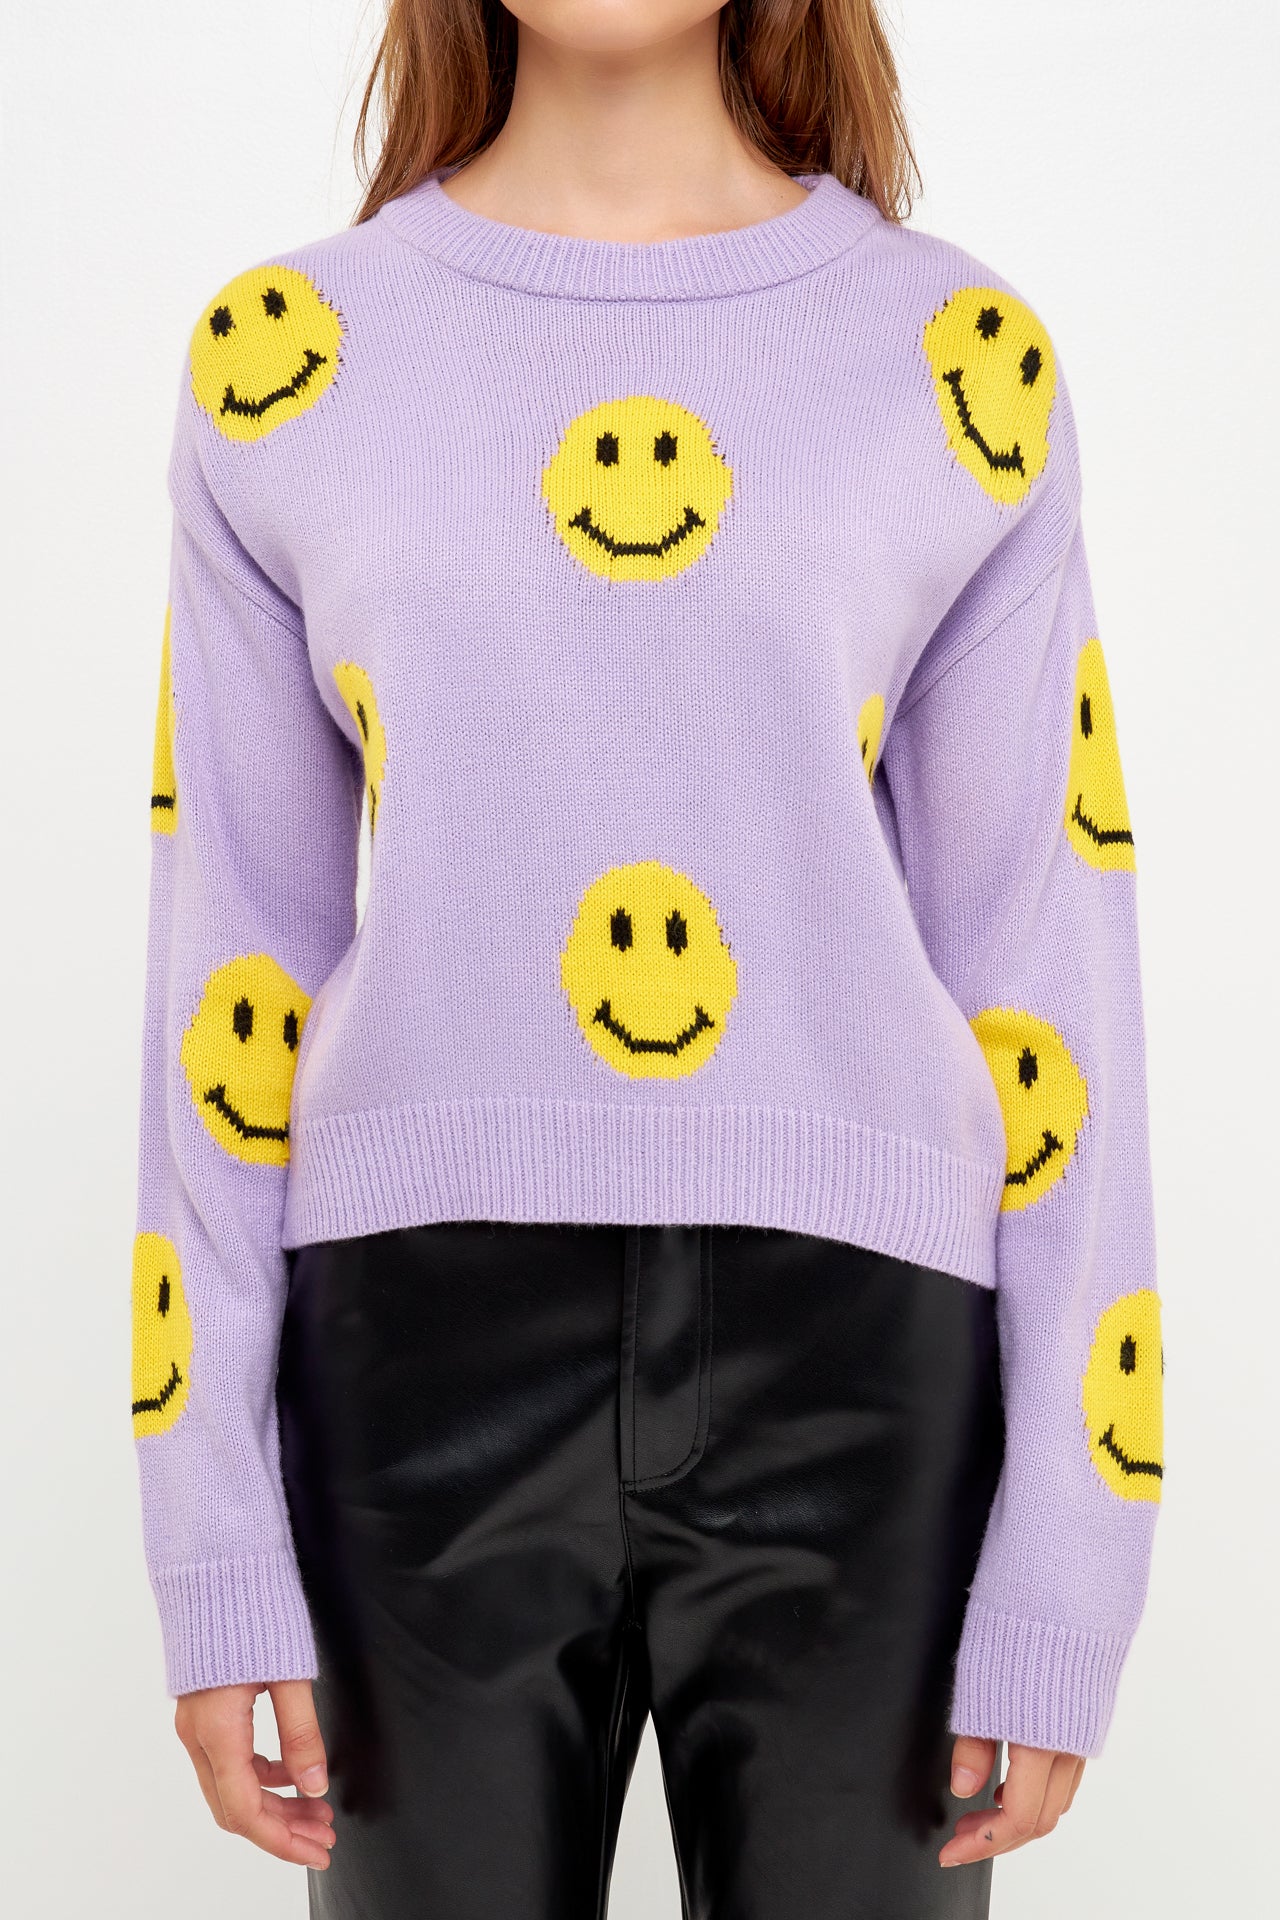 GREY LAB - Smiley Face Sweater - SWEATERS & KNITS available at Objectrare